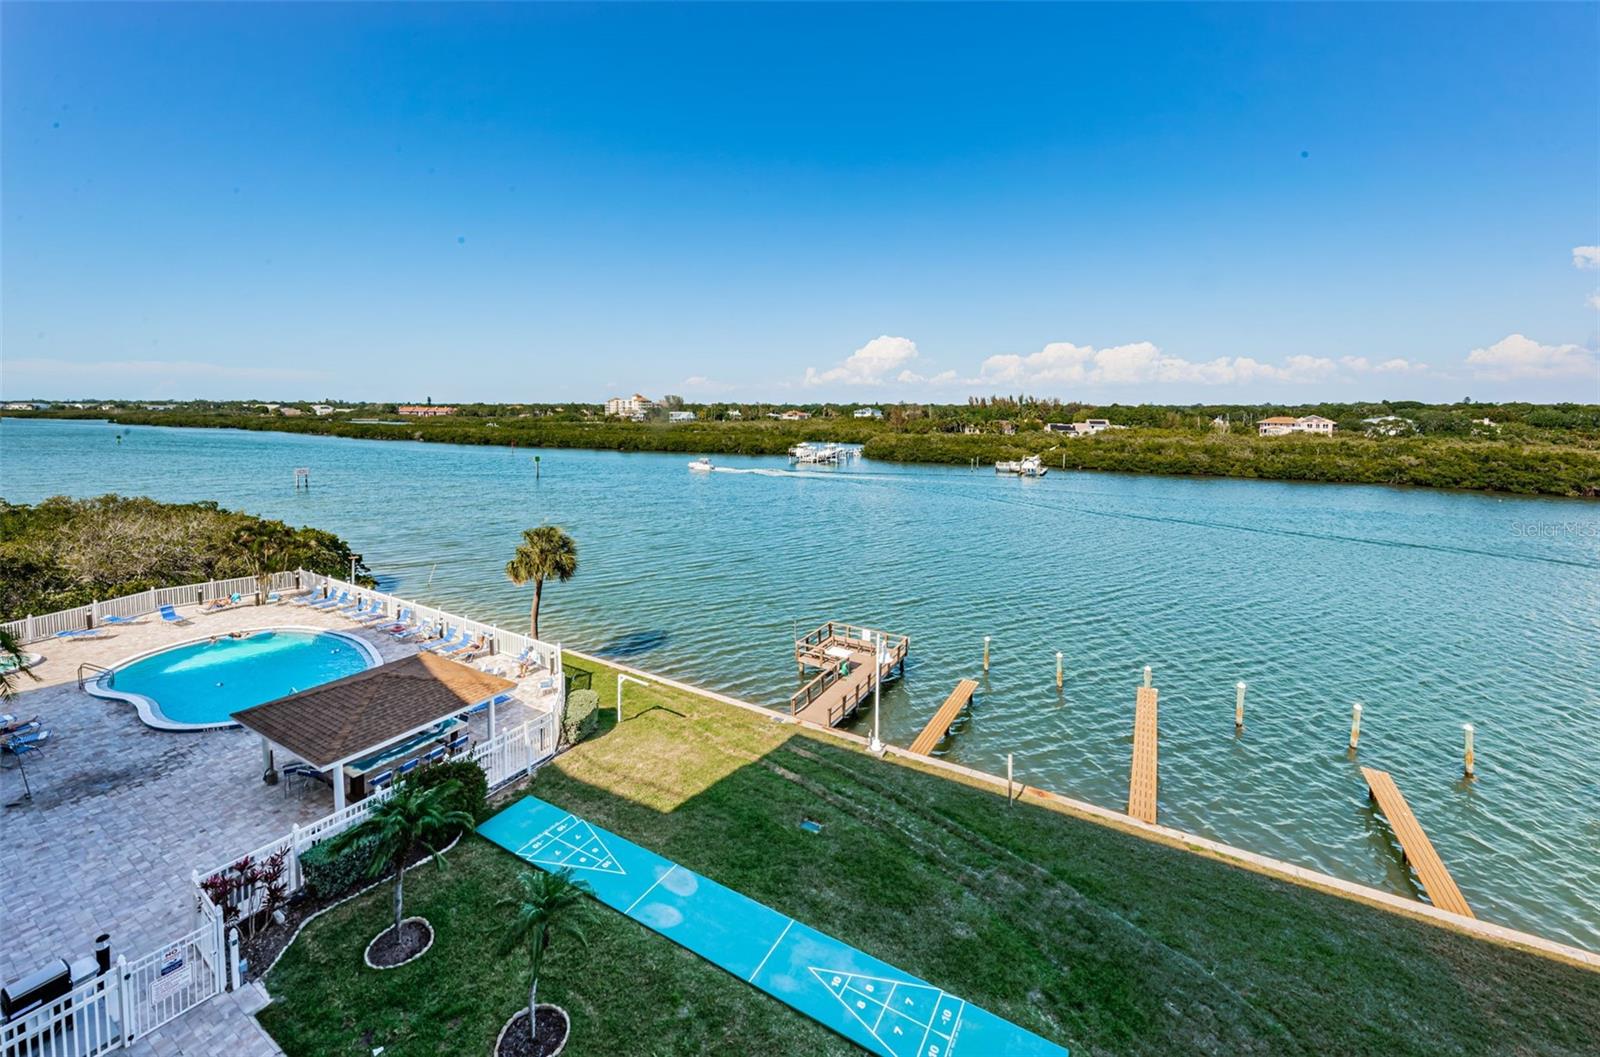 The balcony overlooks the pool and patio area as well as the Boat Docks!